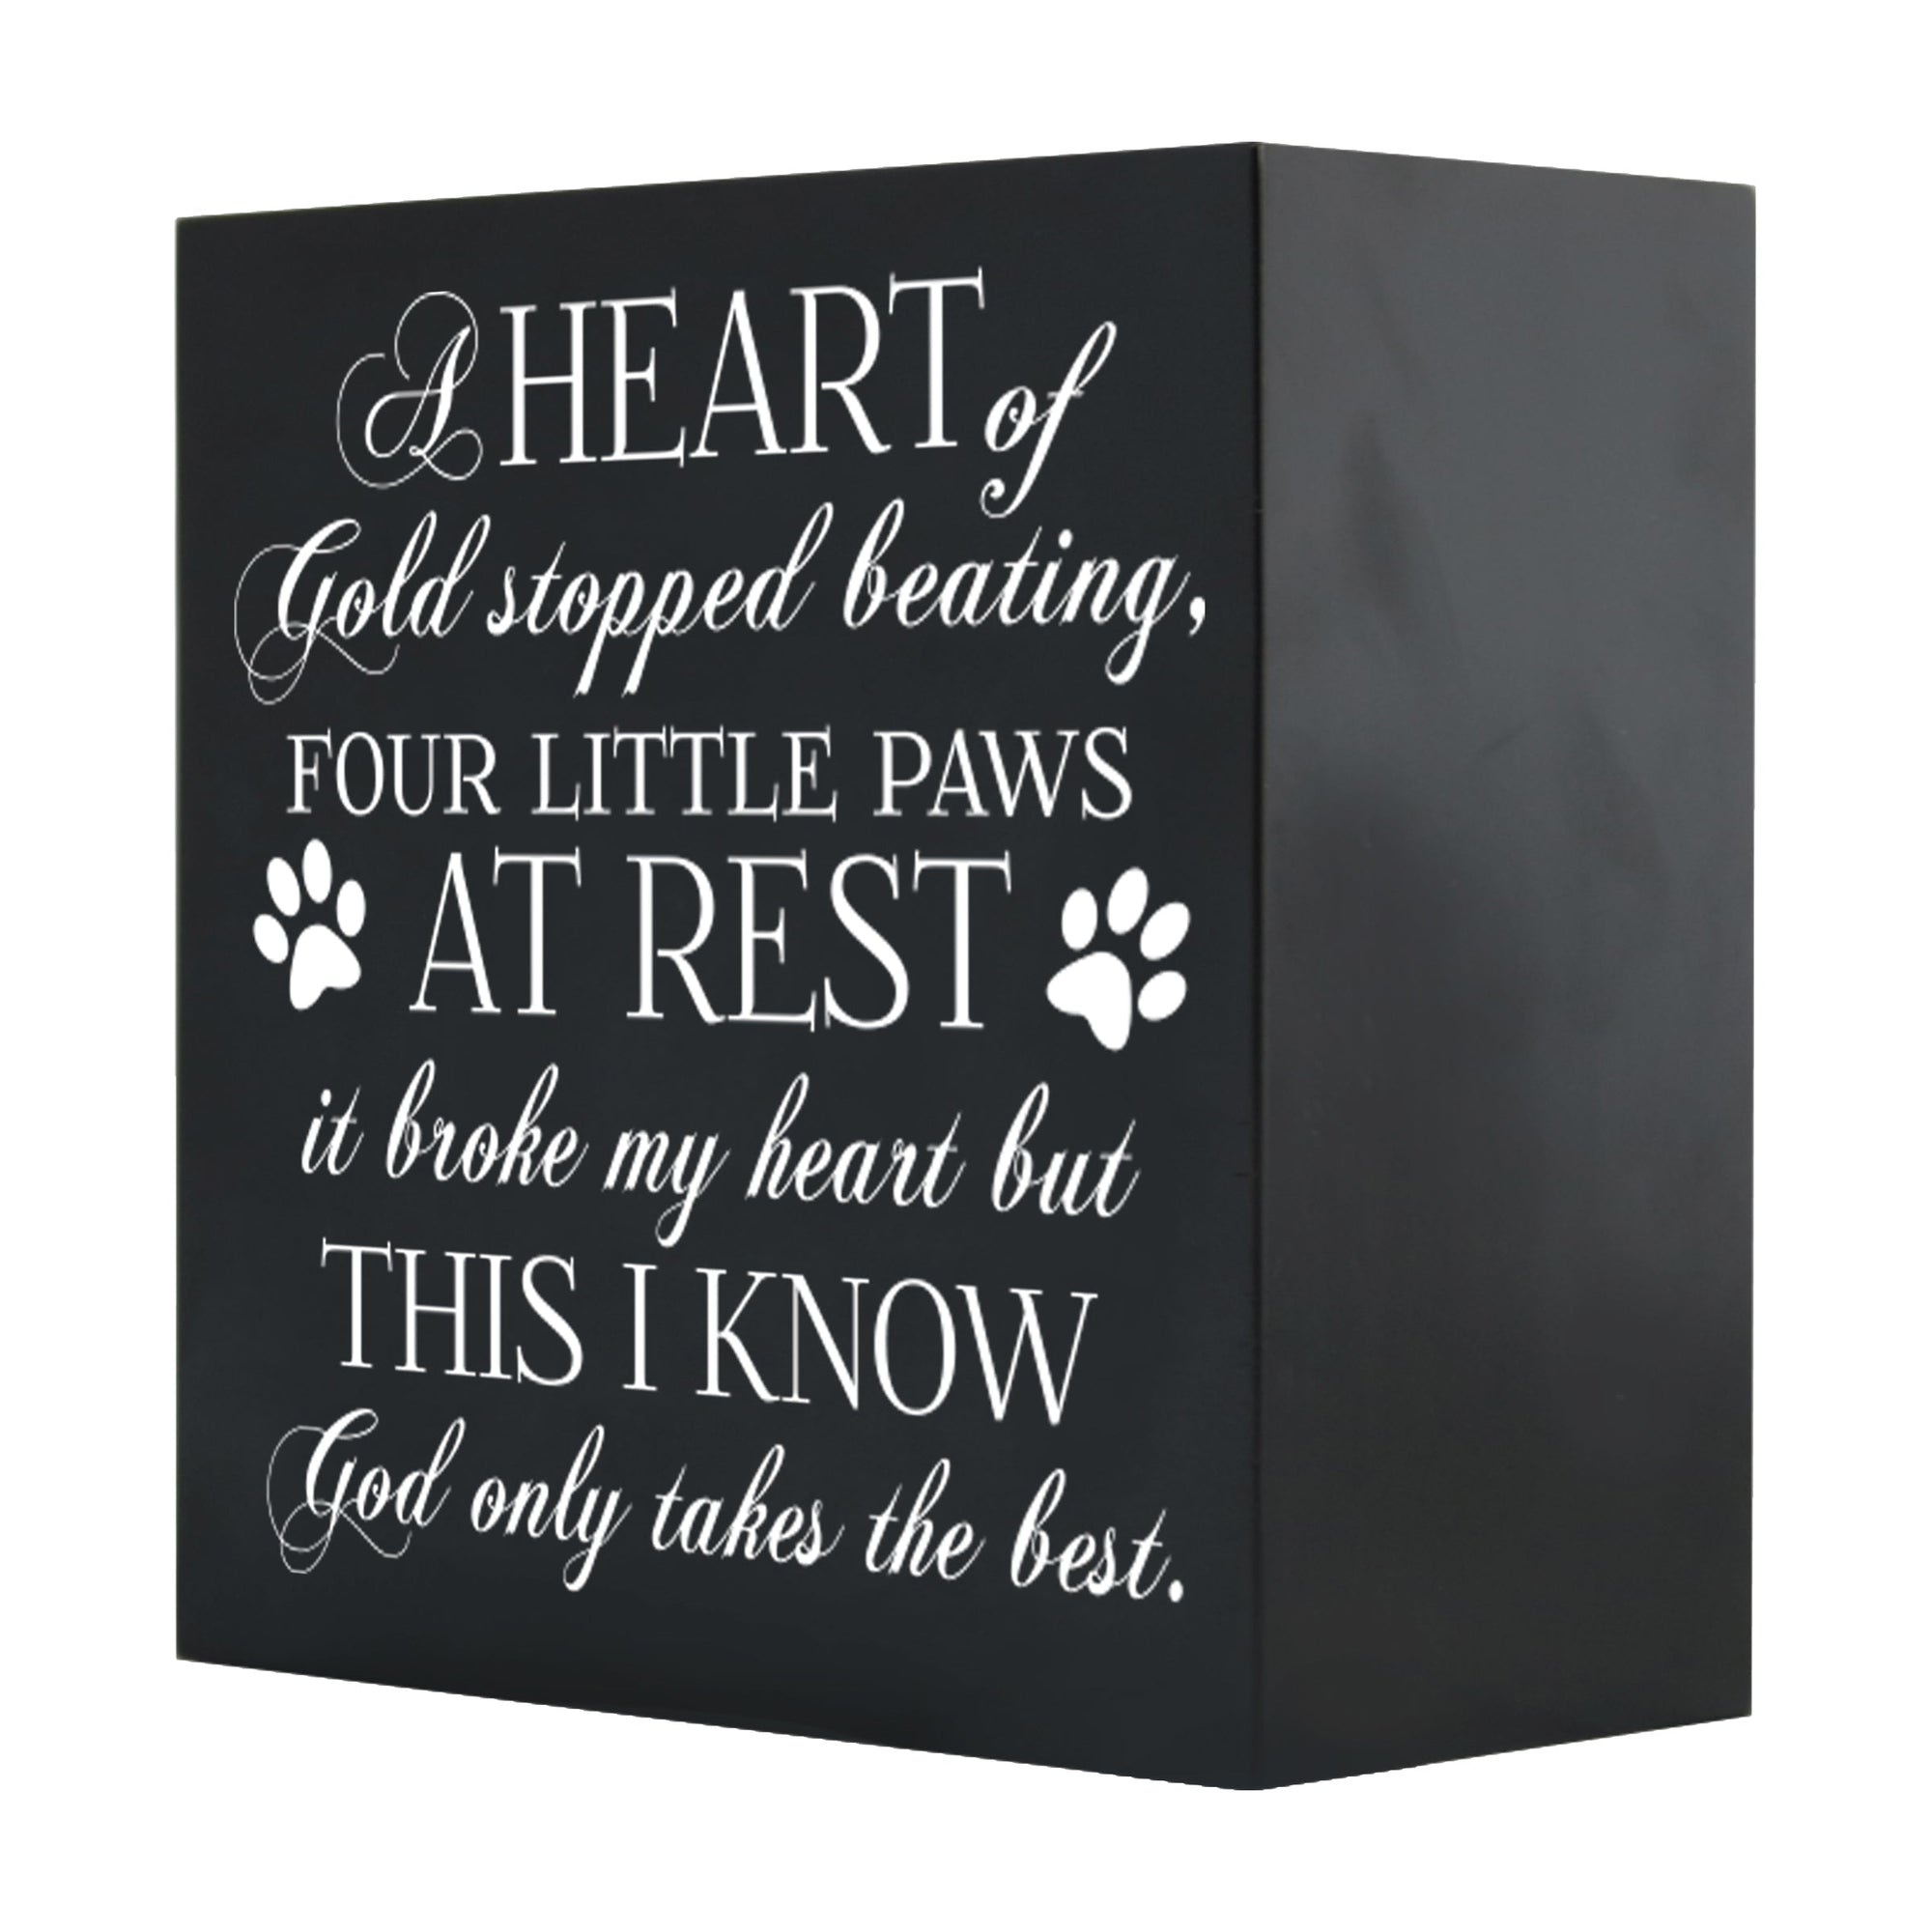 Pet Memorial Shadow Box Cremation Urn for Dog or Cat - A Heart of Gold